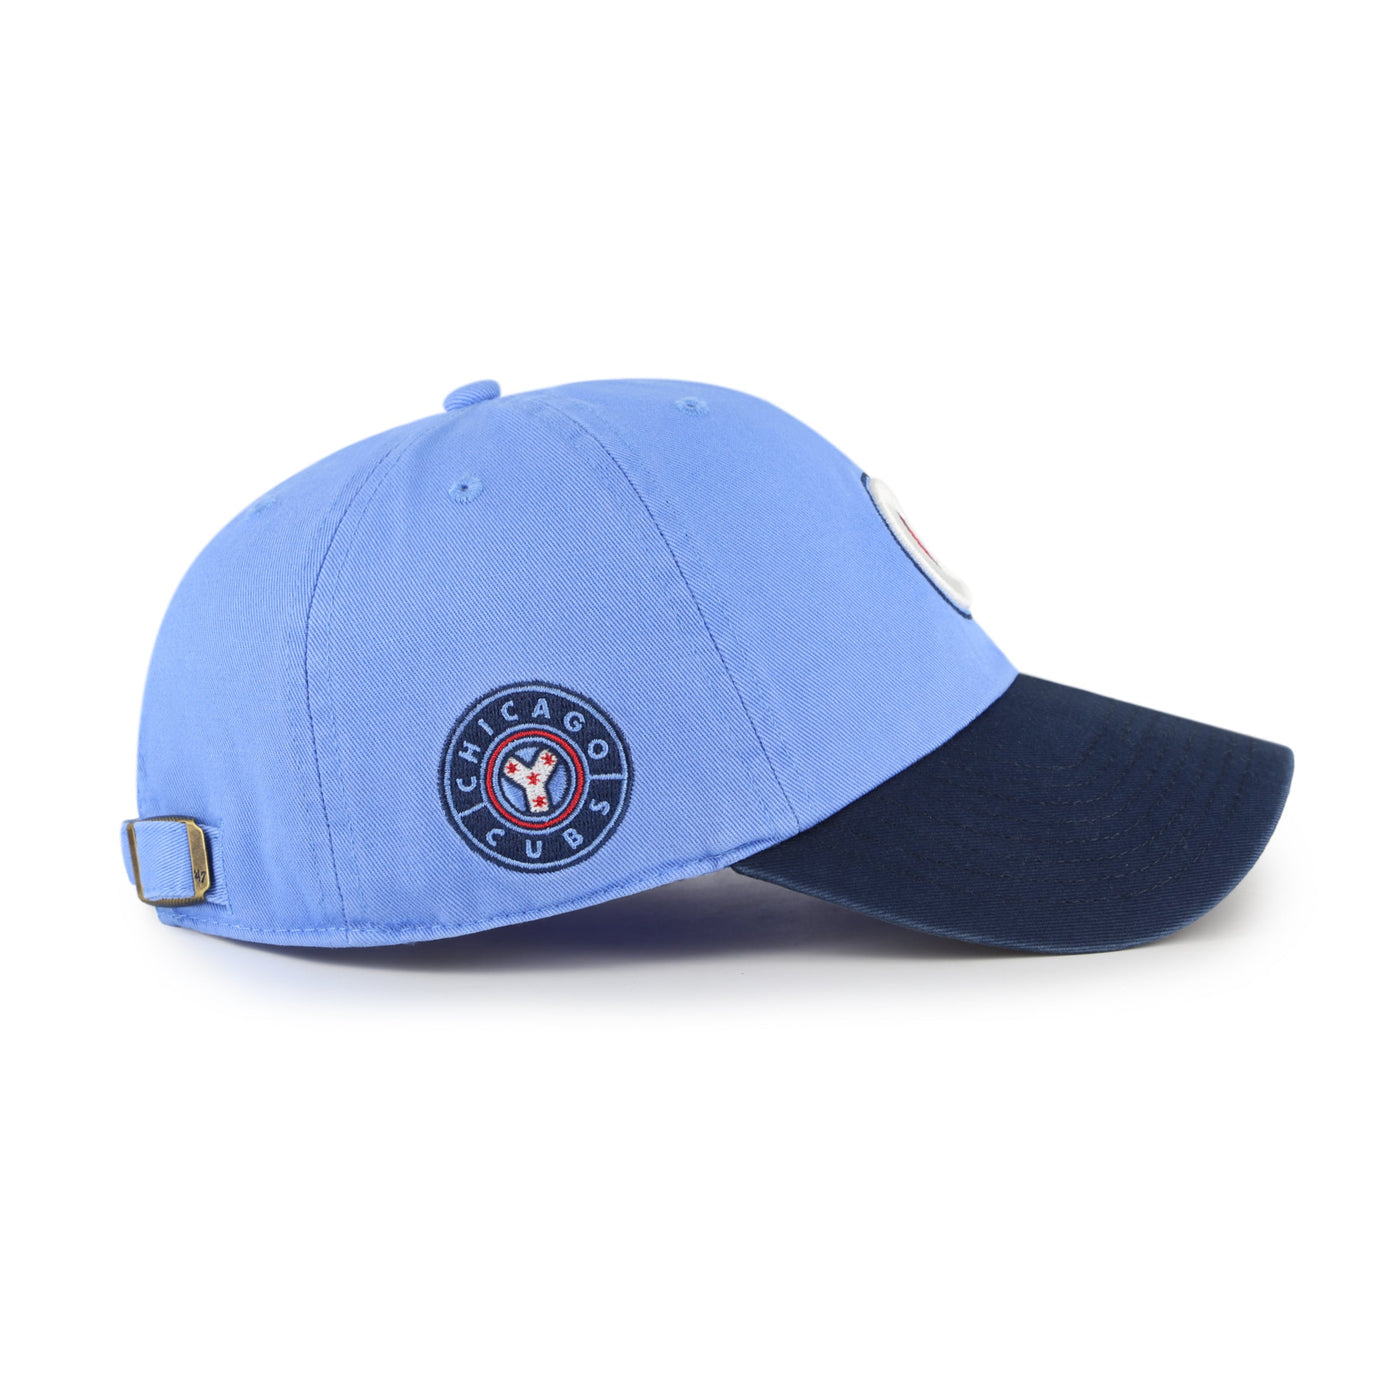 CHICAGO CUBS 47 BRAND CITY CONNECT REVERSE CLEAN UP CAP